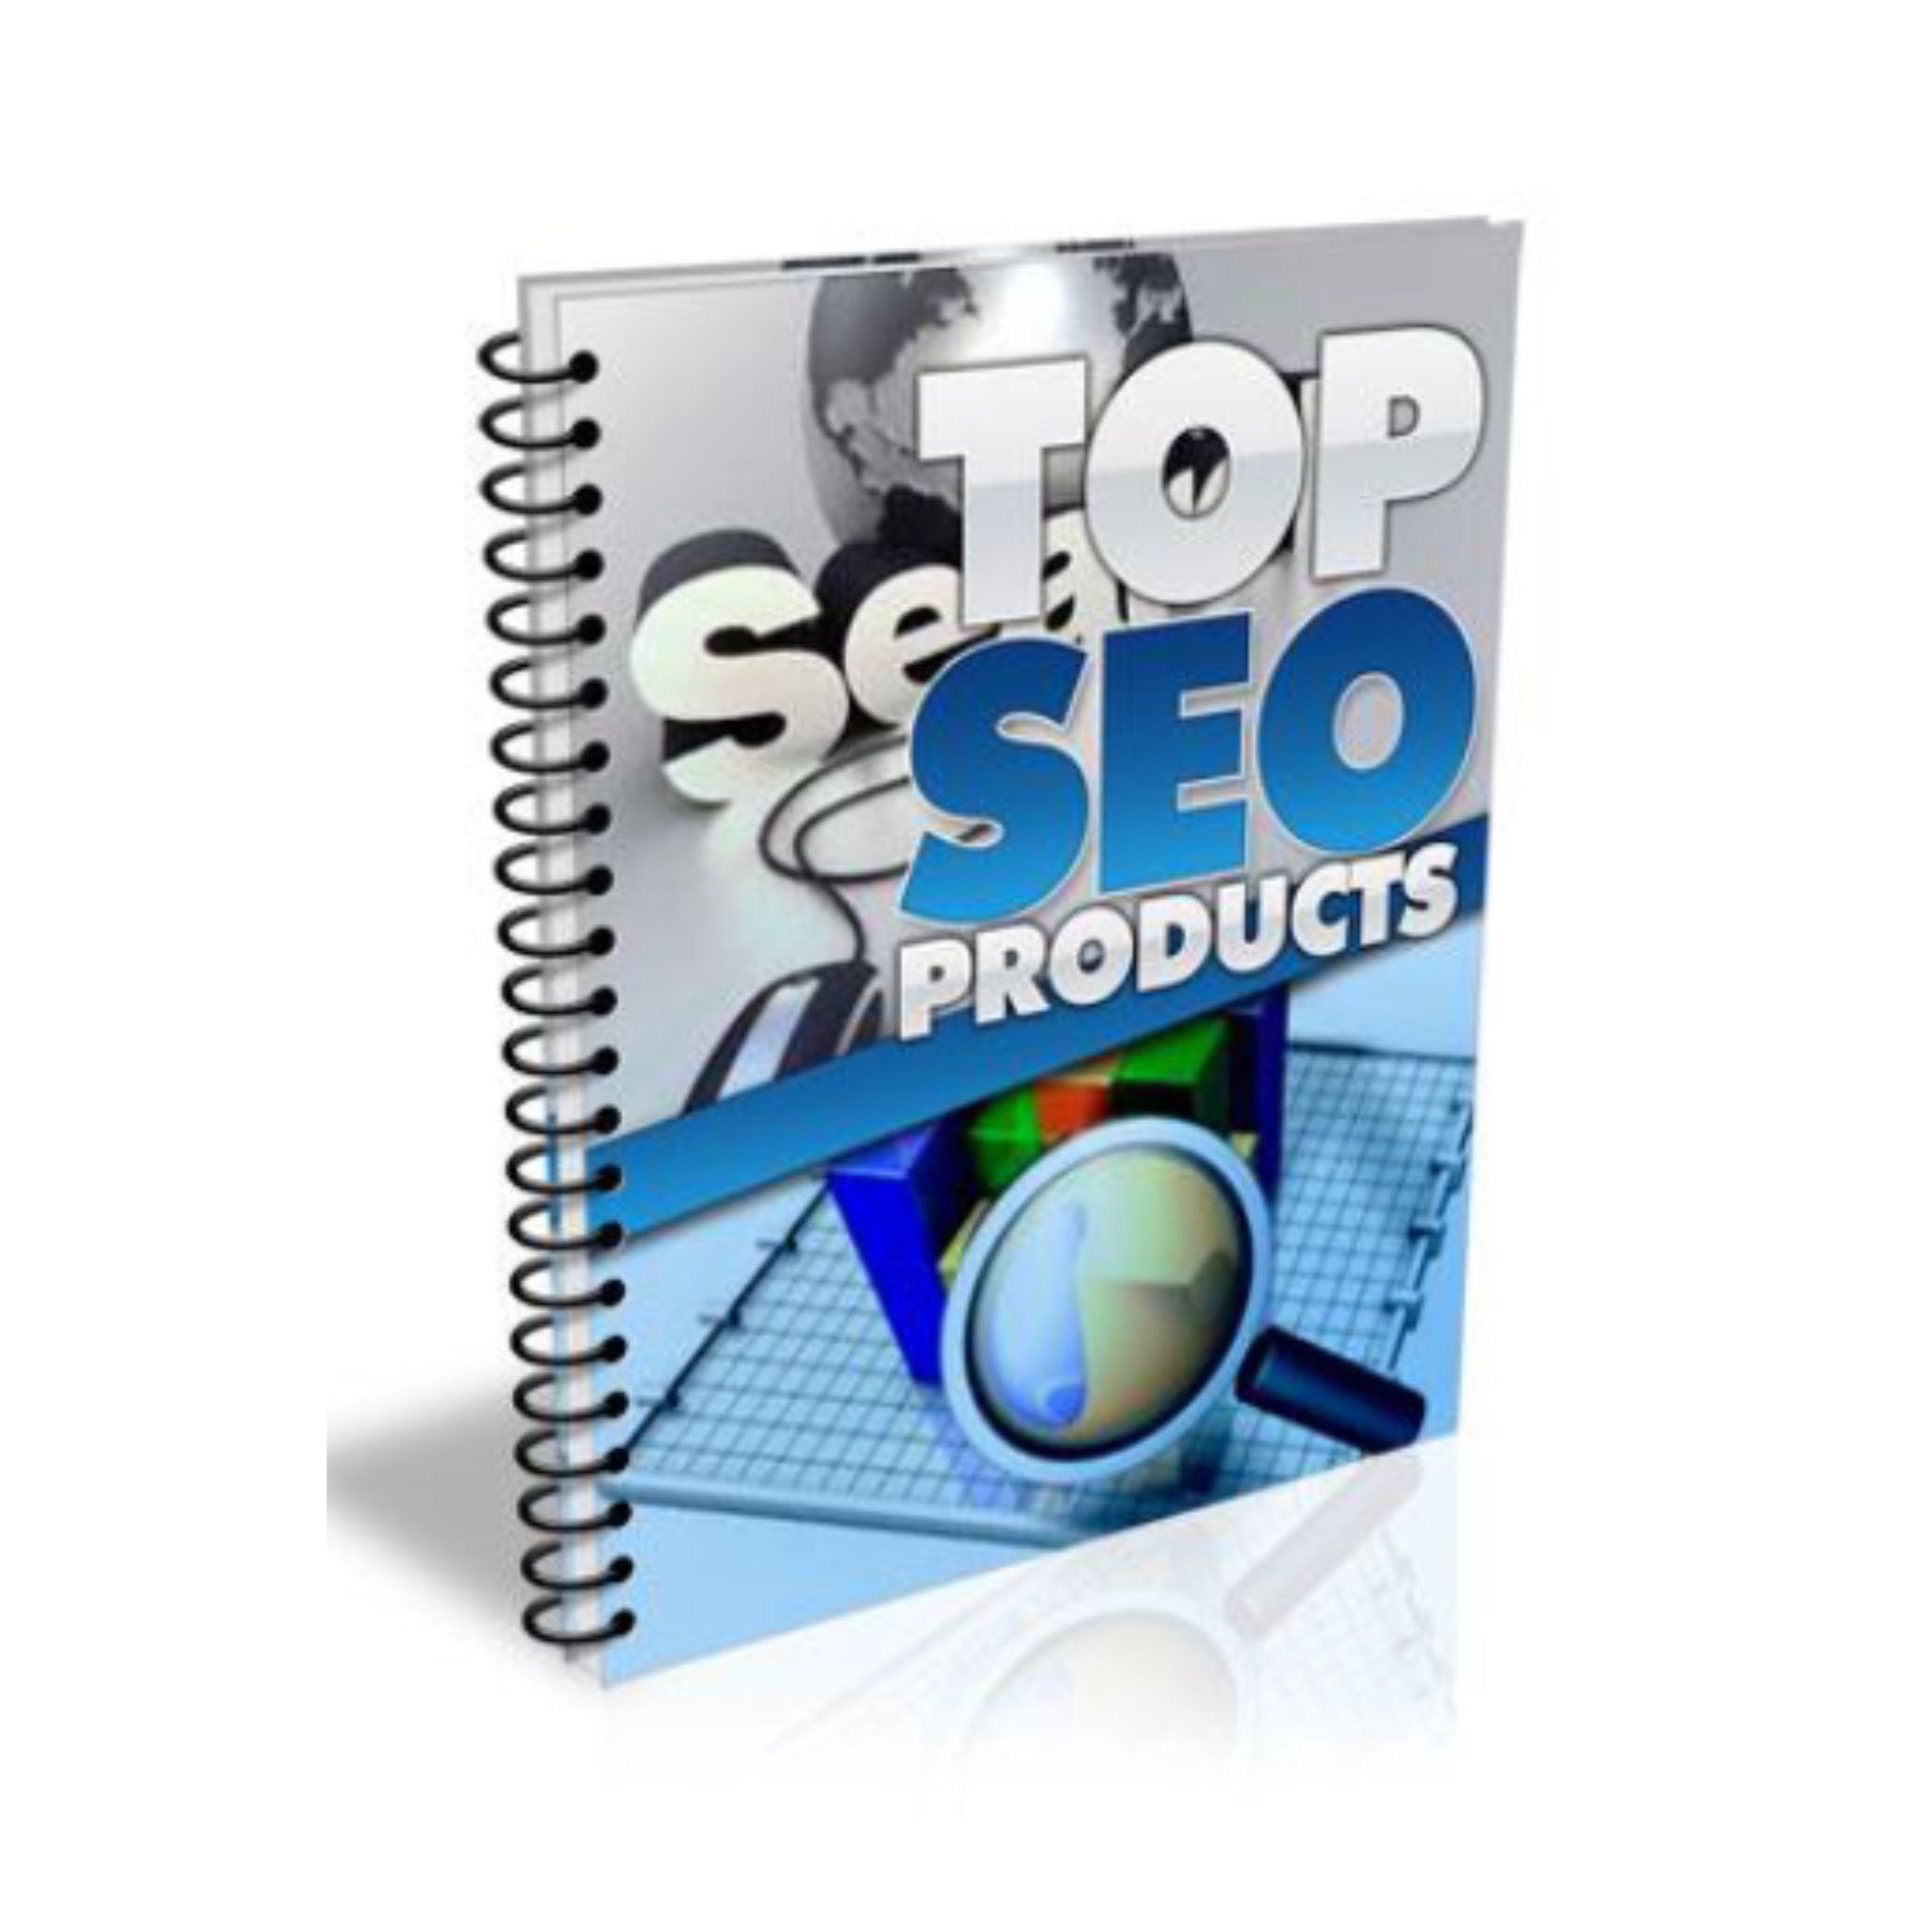 Top SEO Products Ebook